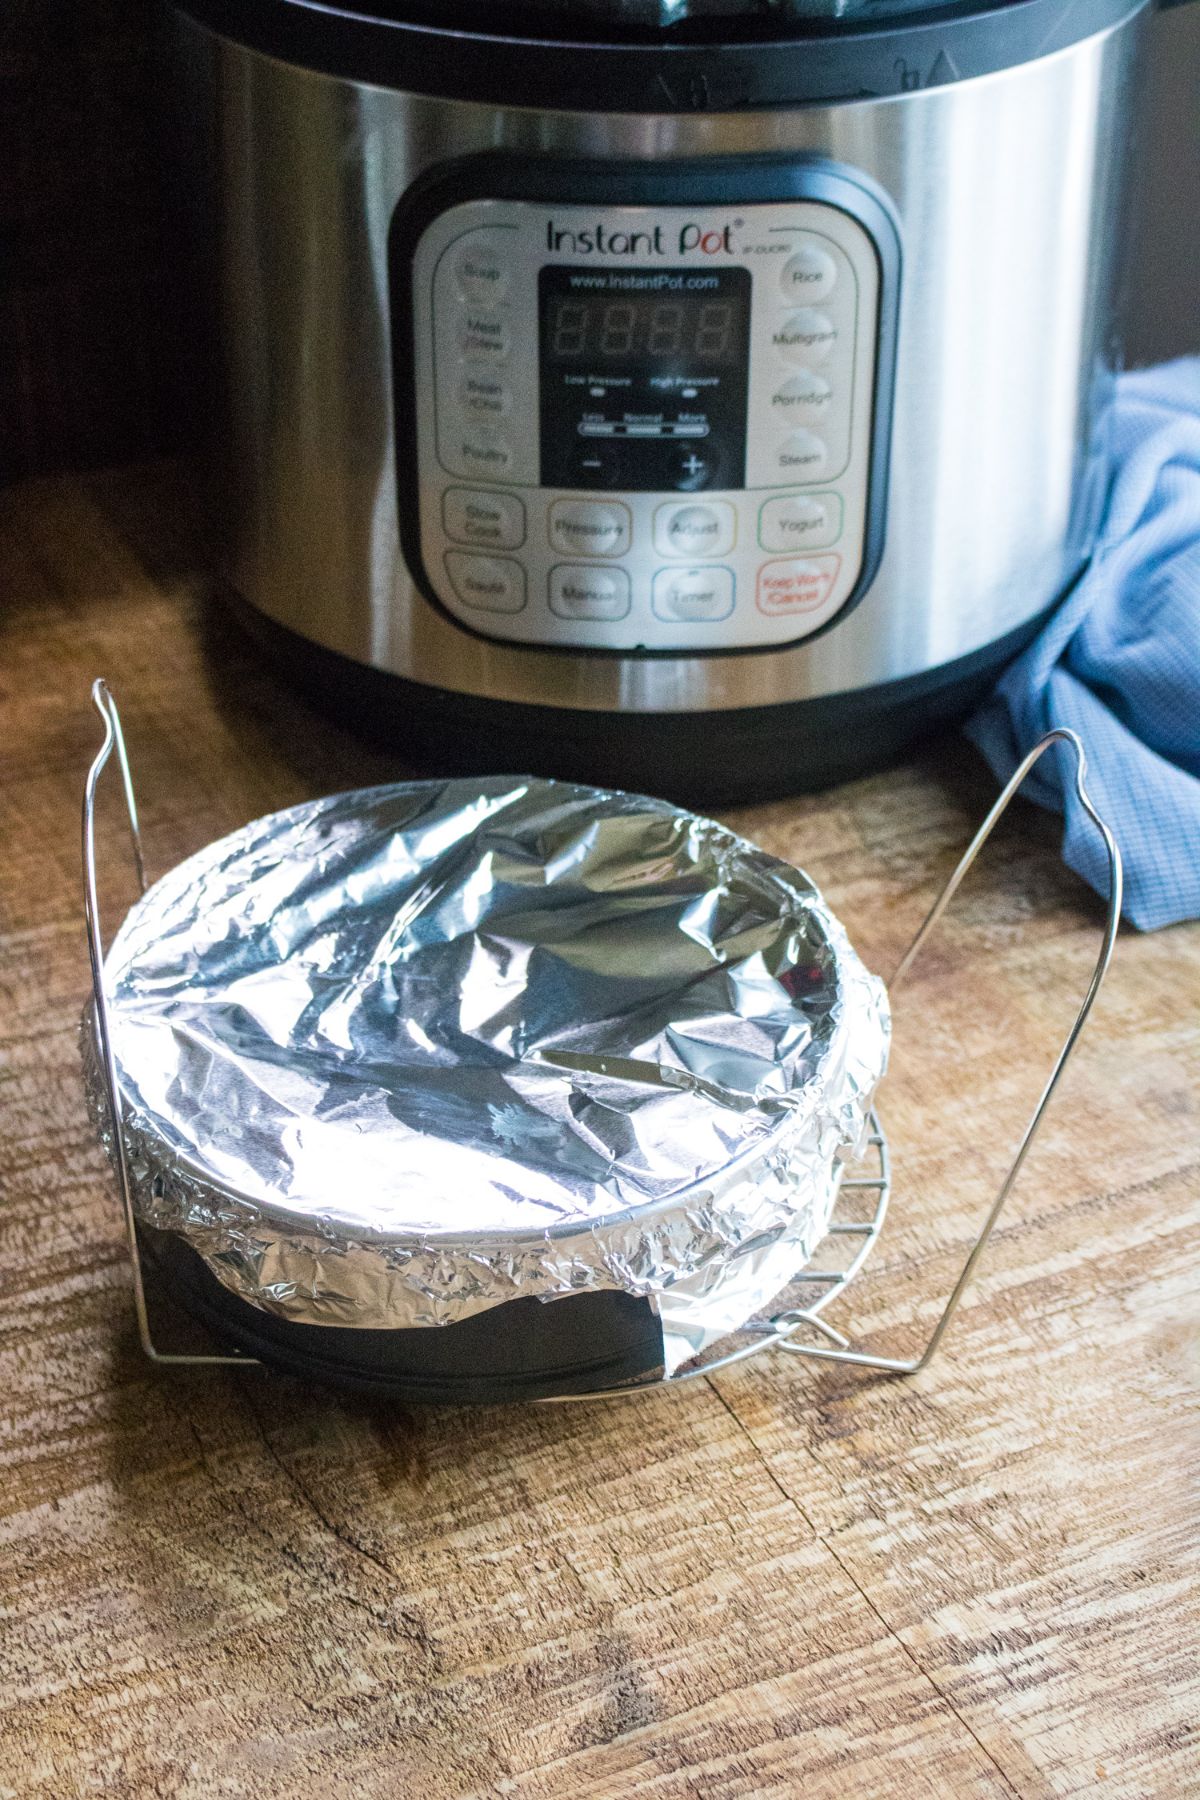 pan covered in foil next to an instant pot and blue cloth